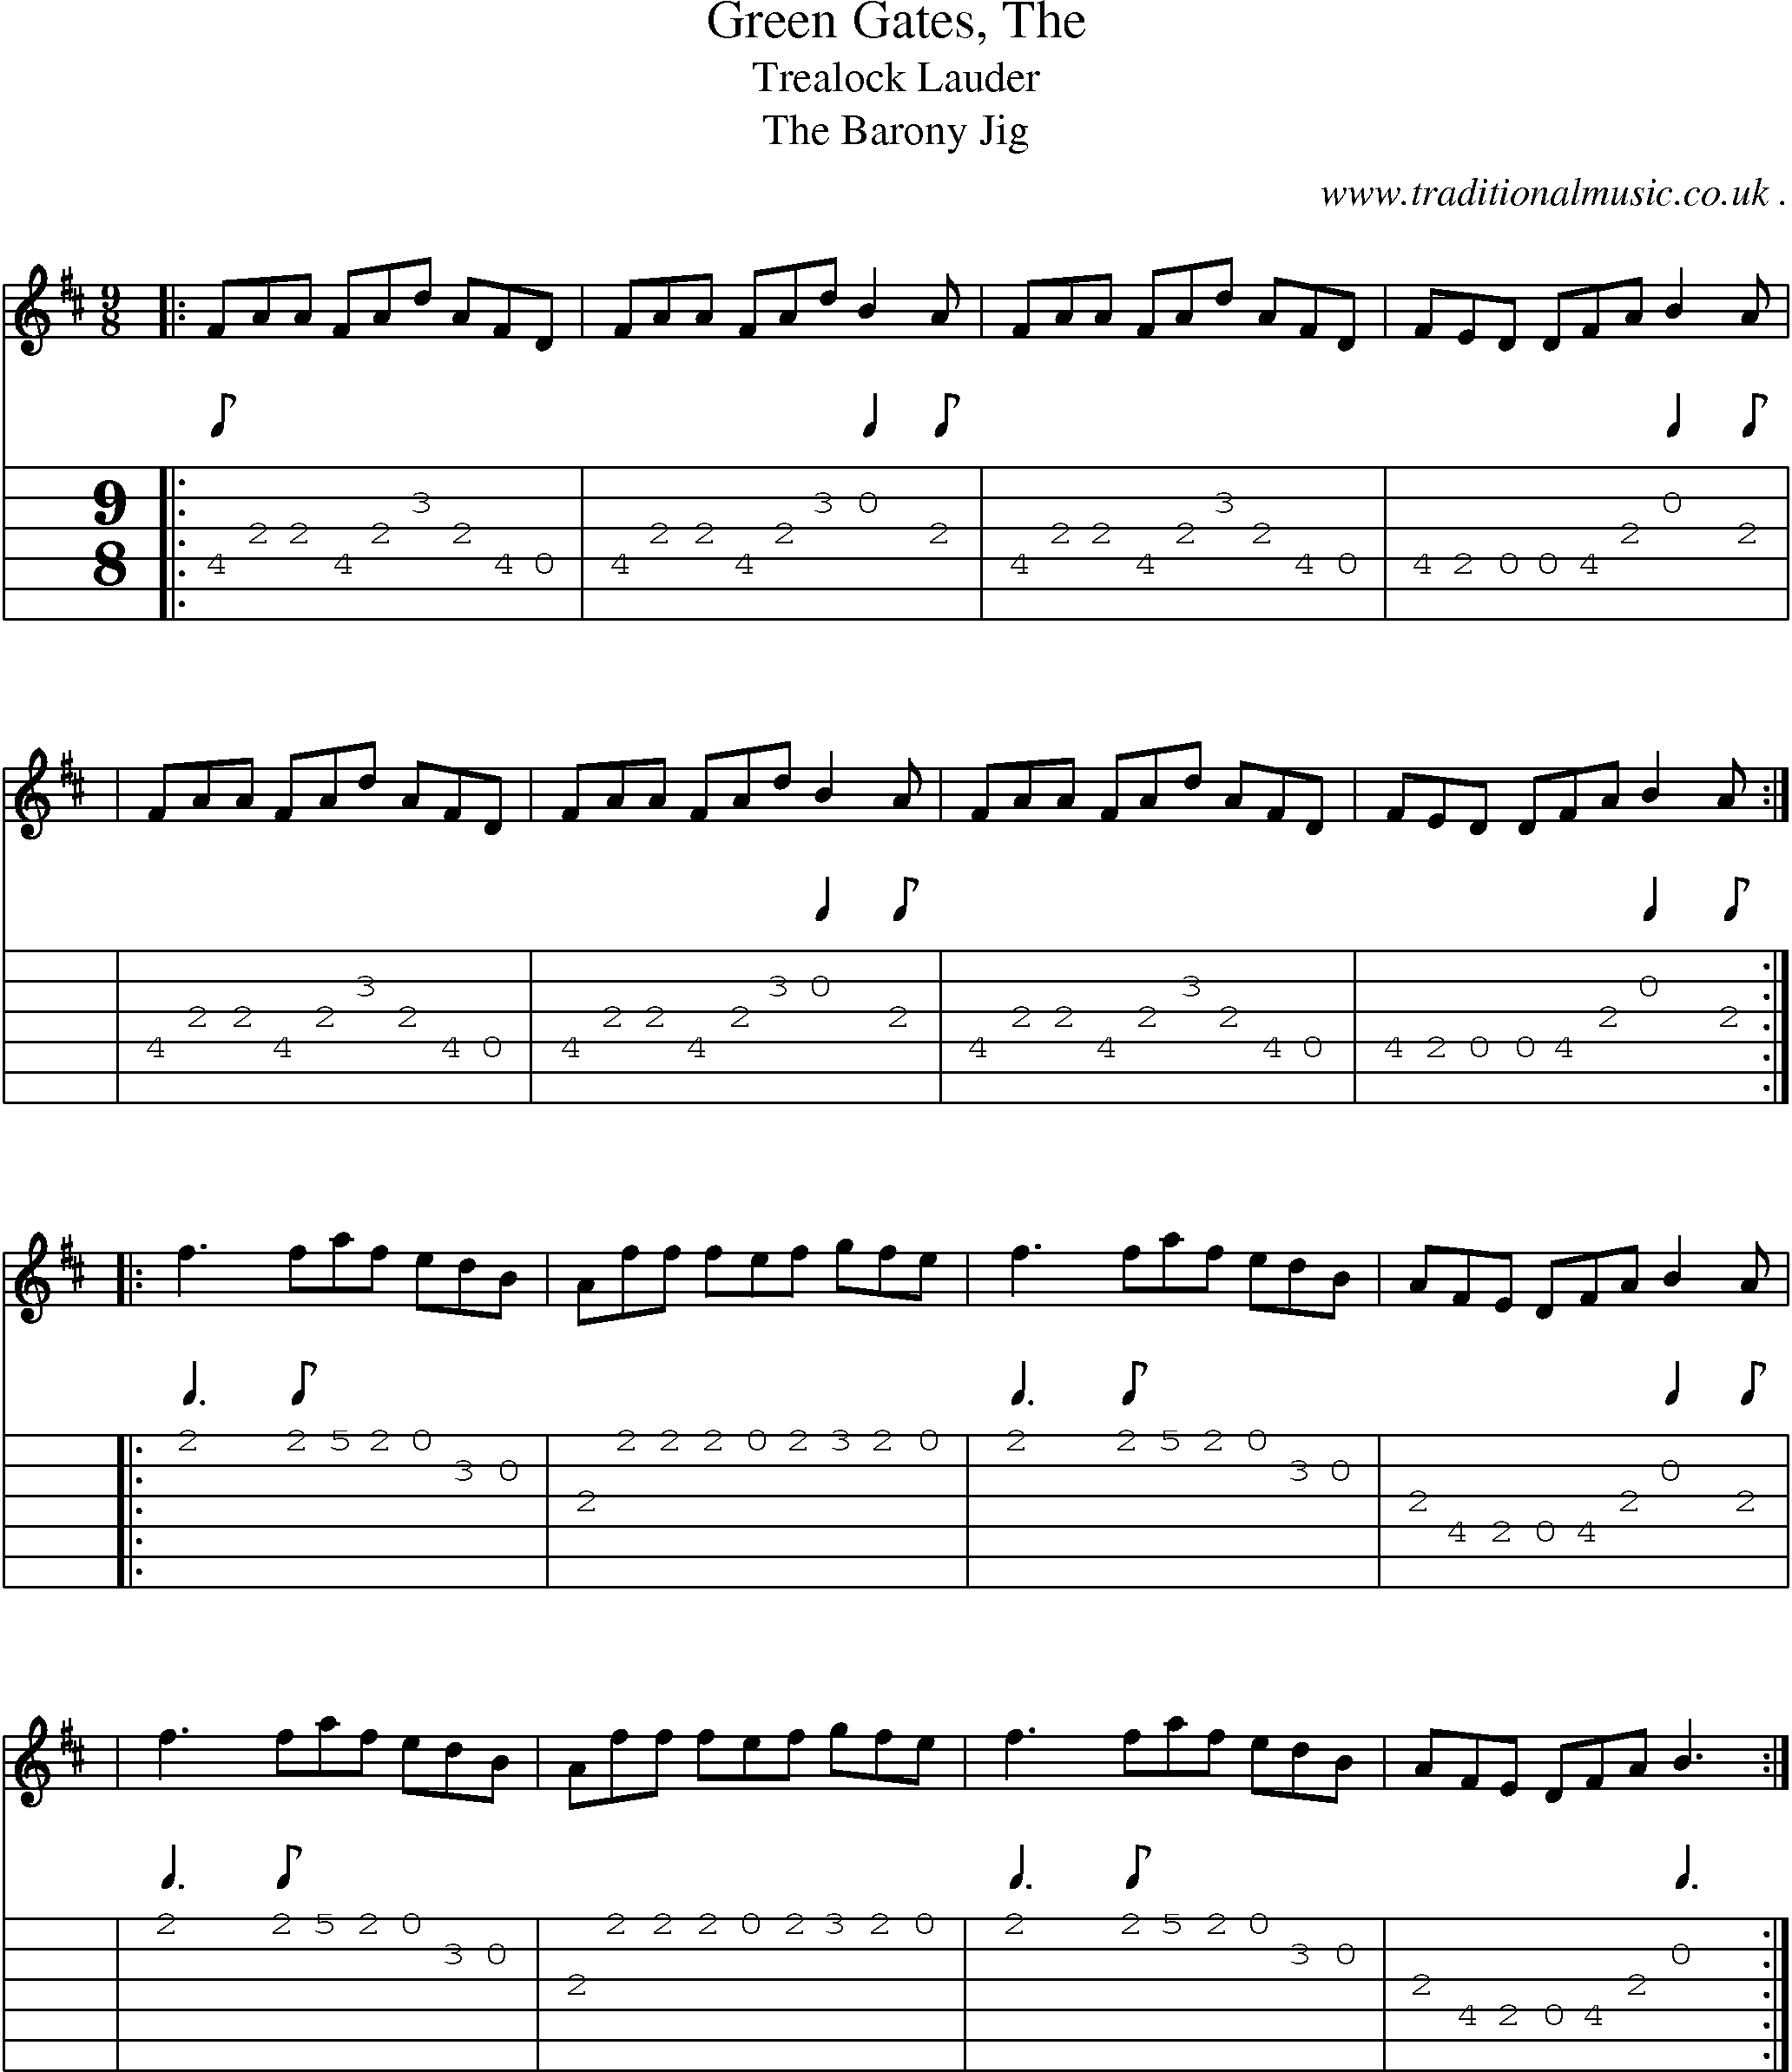 Sheet-music  score, Chords and Guitar Tabs for Green Gates The